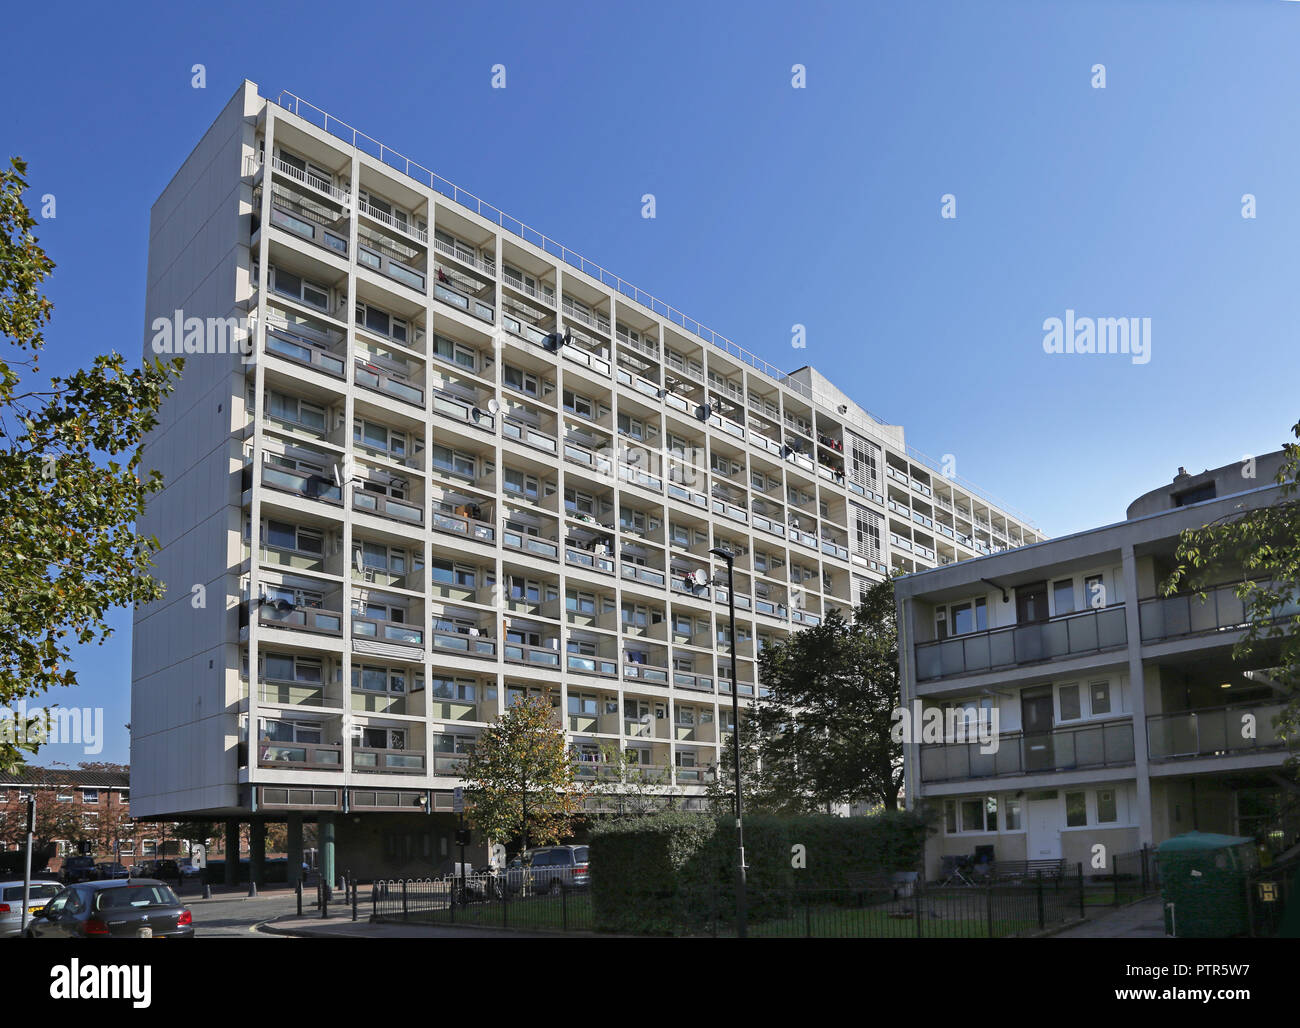 Wimbourne House, Kennington, London. A typical 1960's multi-storey local authority housing block in the south London borough of Lambeth. Stock Photo